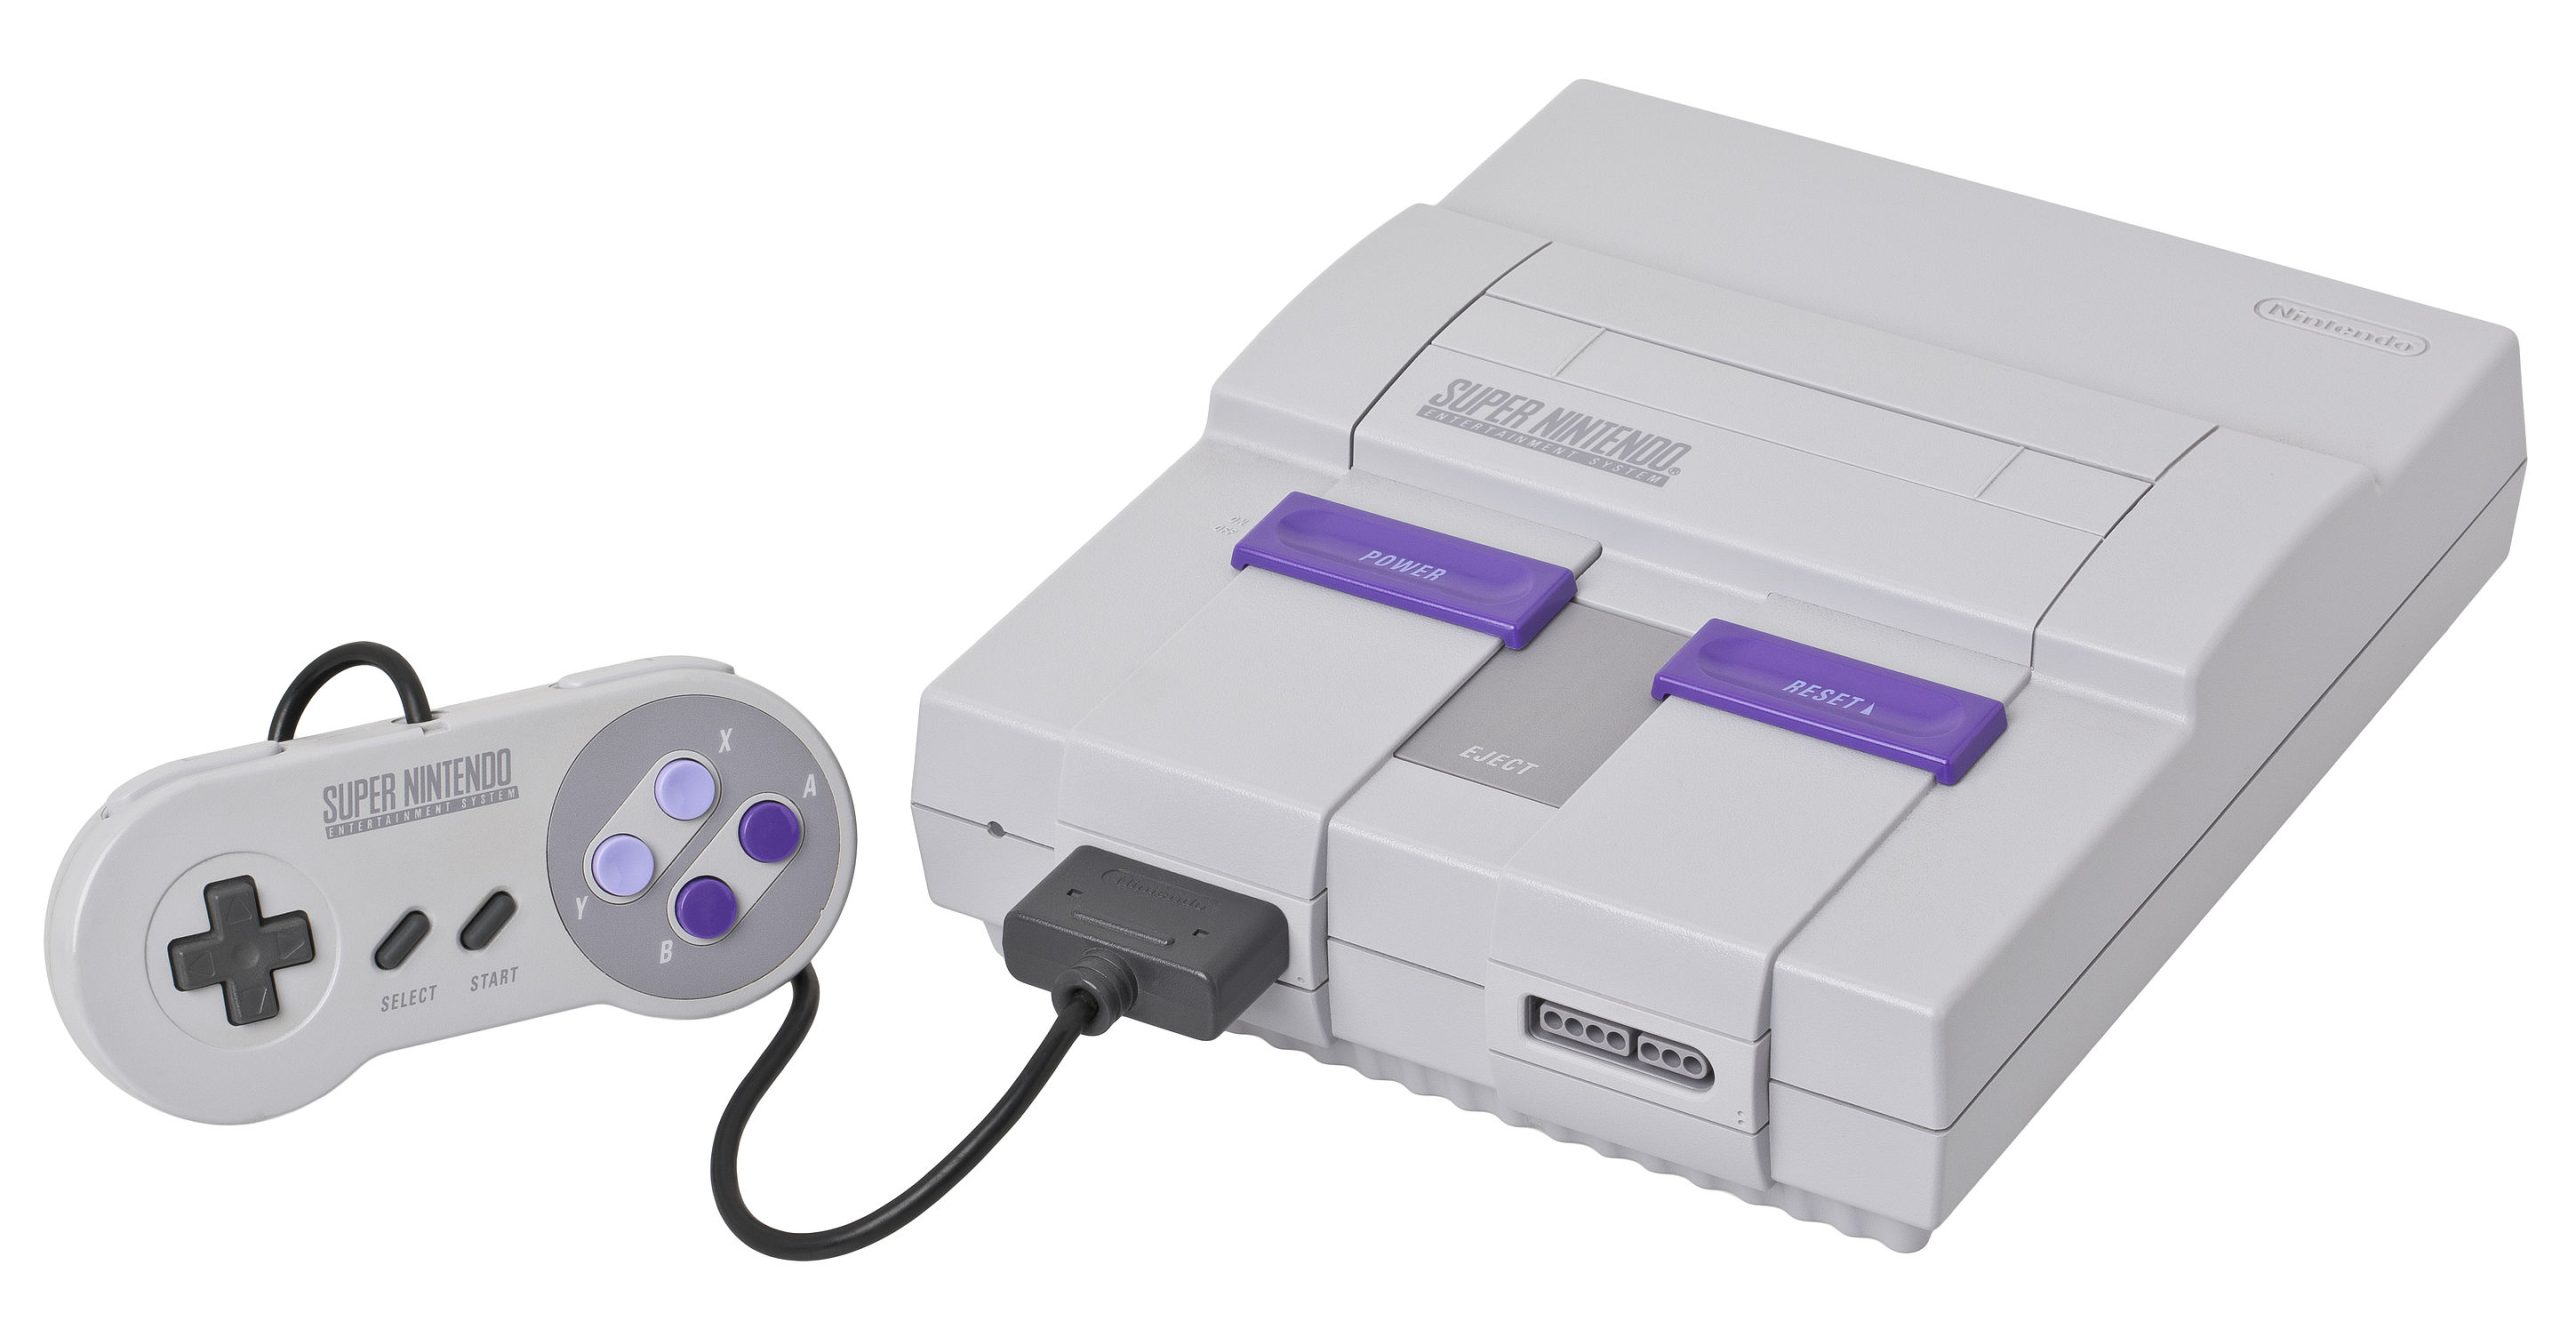 Rumor: Super NES Mini console coming later this year